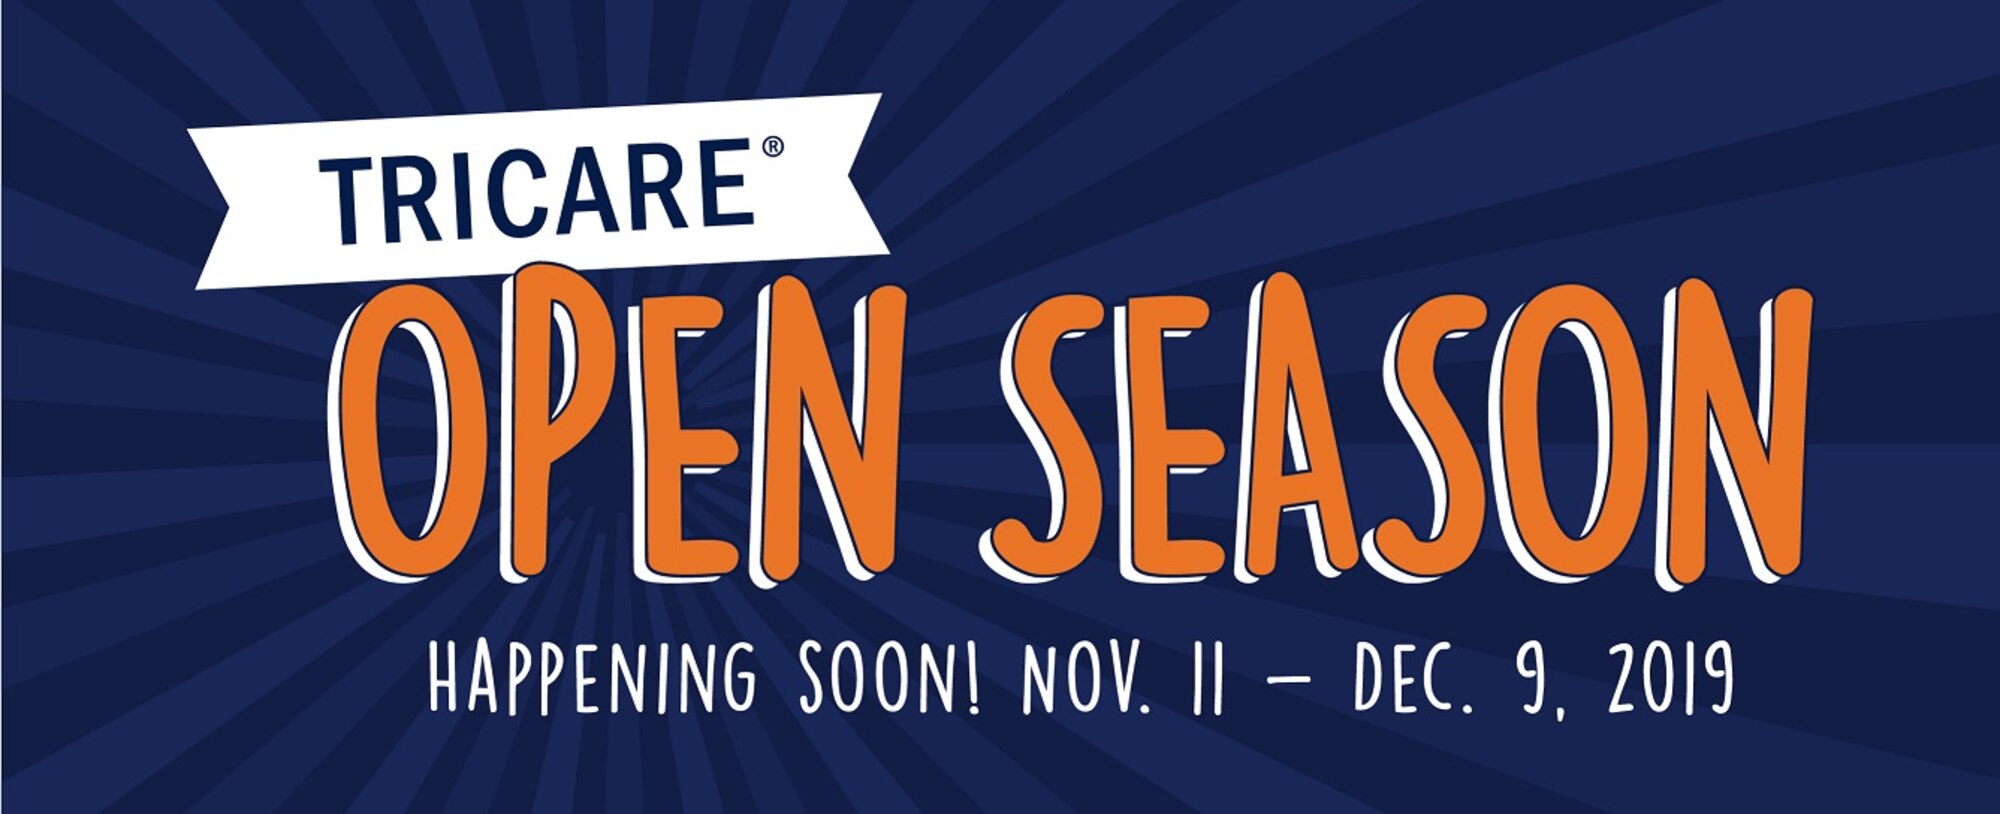 TRICARE Open Season applies to anyone enrolled in or eligible for a TRICARE Prime or TRICARE Select health plan. Federal Benefits Open Season is for enrollment in a Federal Employees Dental and Vision Insurance Program dental and vision plan. Both the TRICARE and FEDVIP open seasons will run from Nov. 11 to Dec. 9. The enrollment choices that you make during this period will take effect on Jan. 1, 2020.